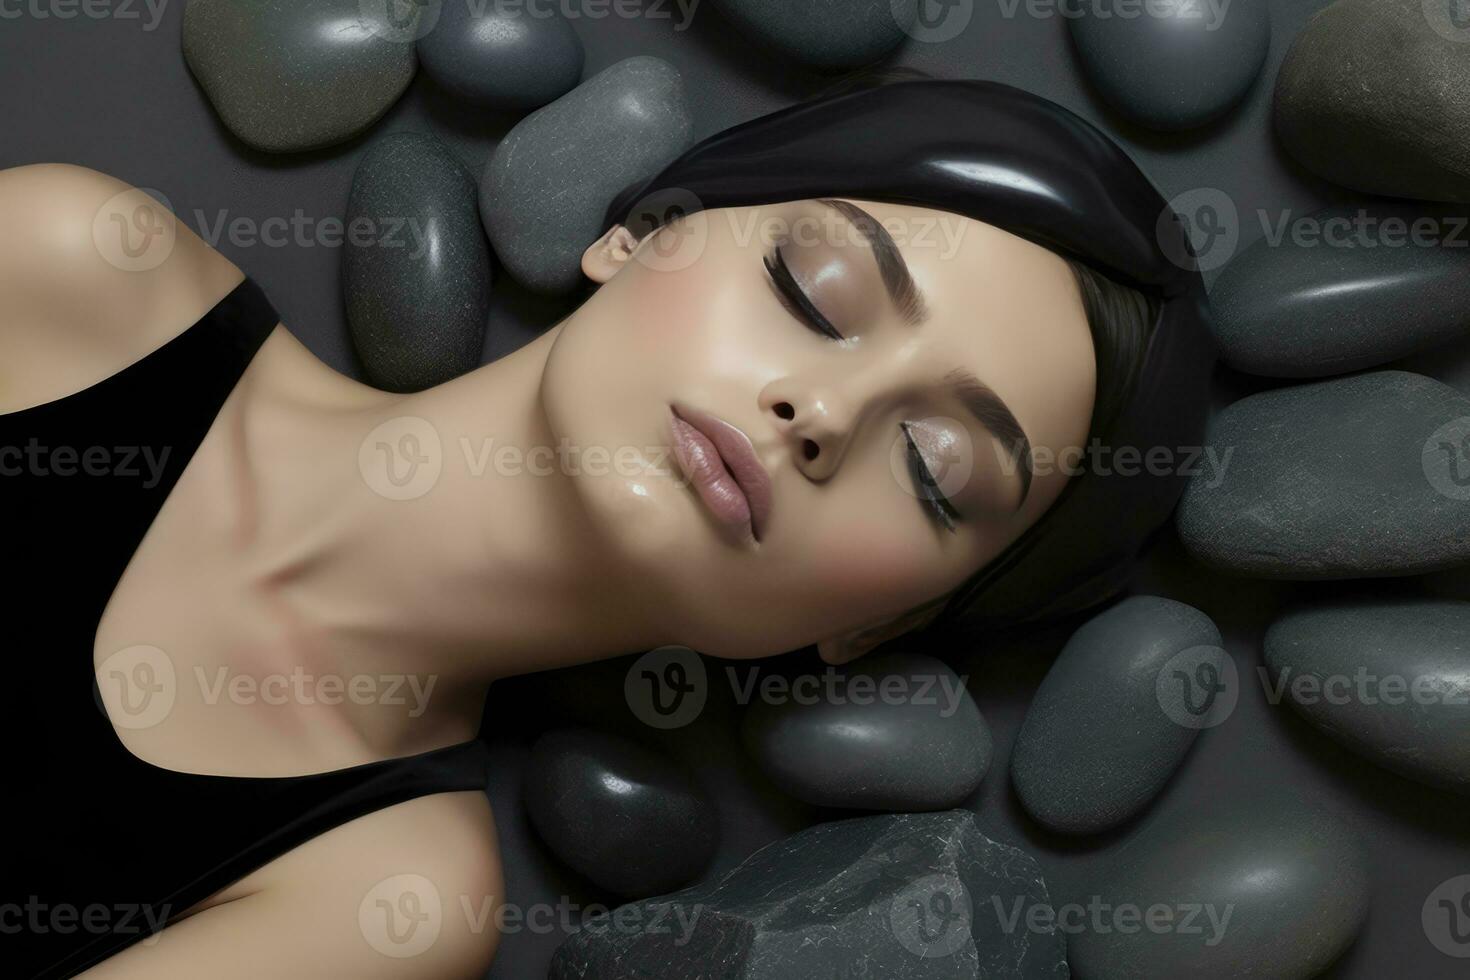 a young woman with a peaceful expression is lying down on a bed of black rocks, which serves as a unique and natural background. Her eyes are closed, and she appears to be enjoying a moment photo